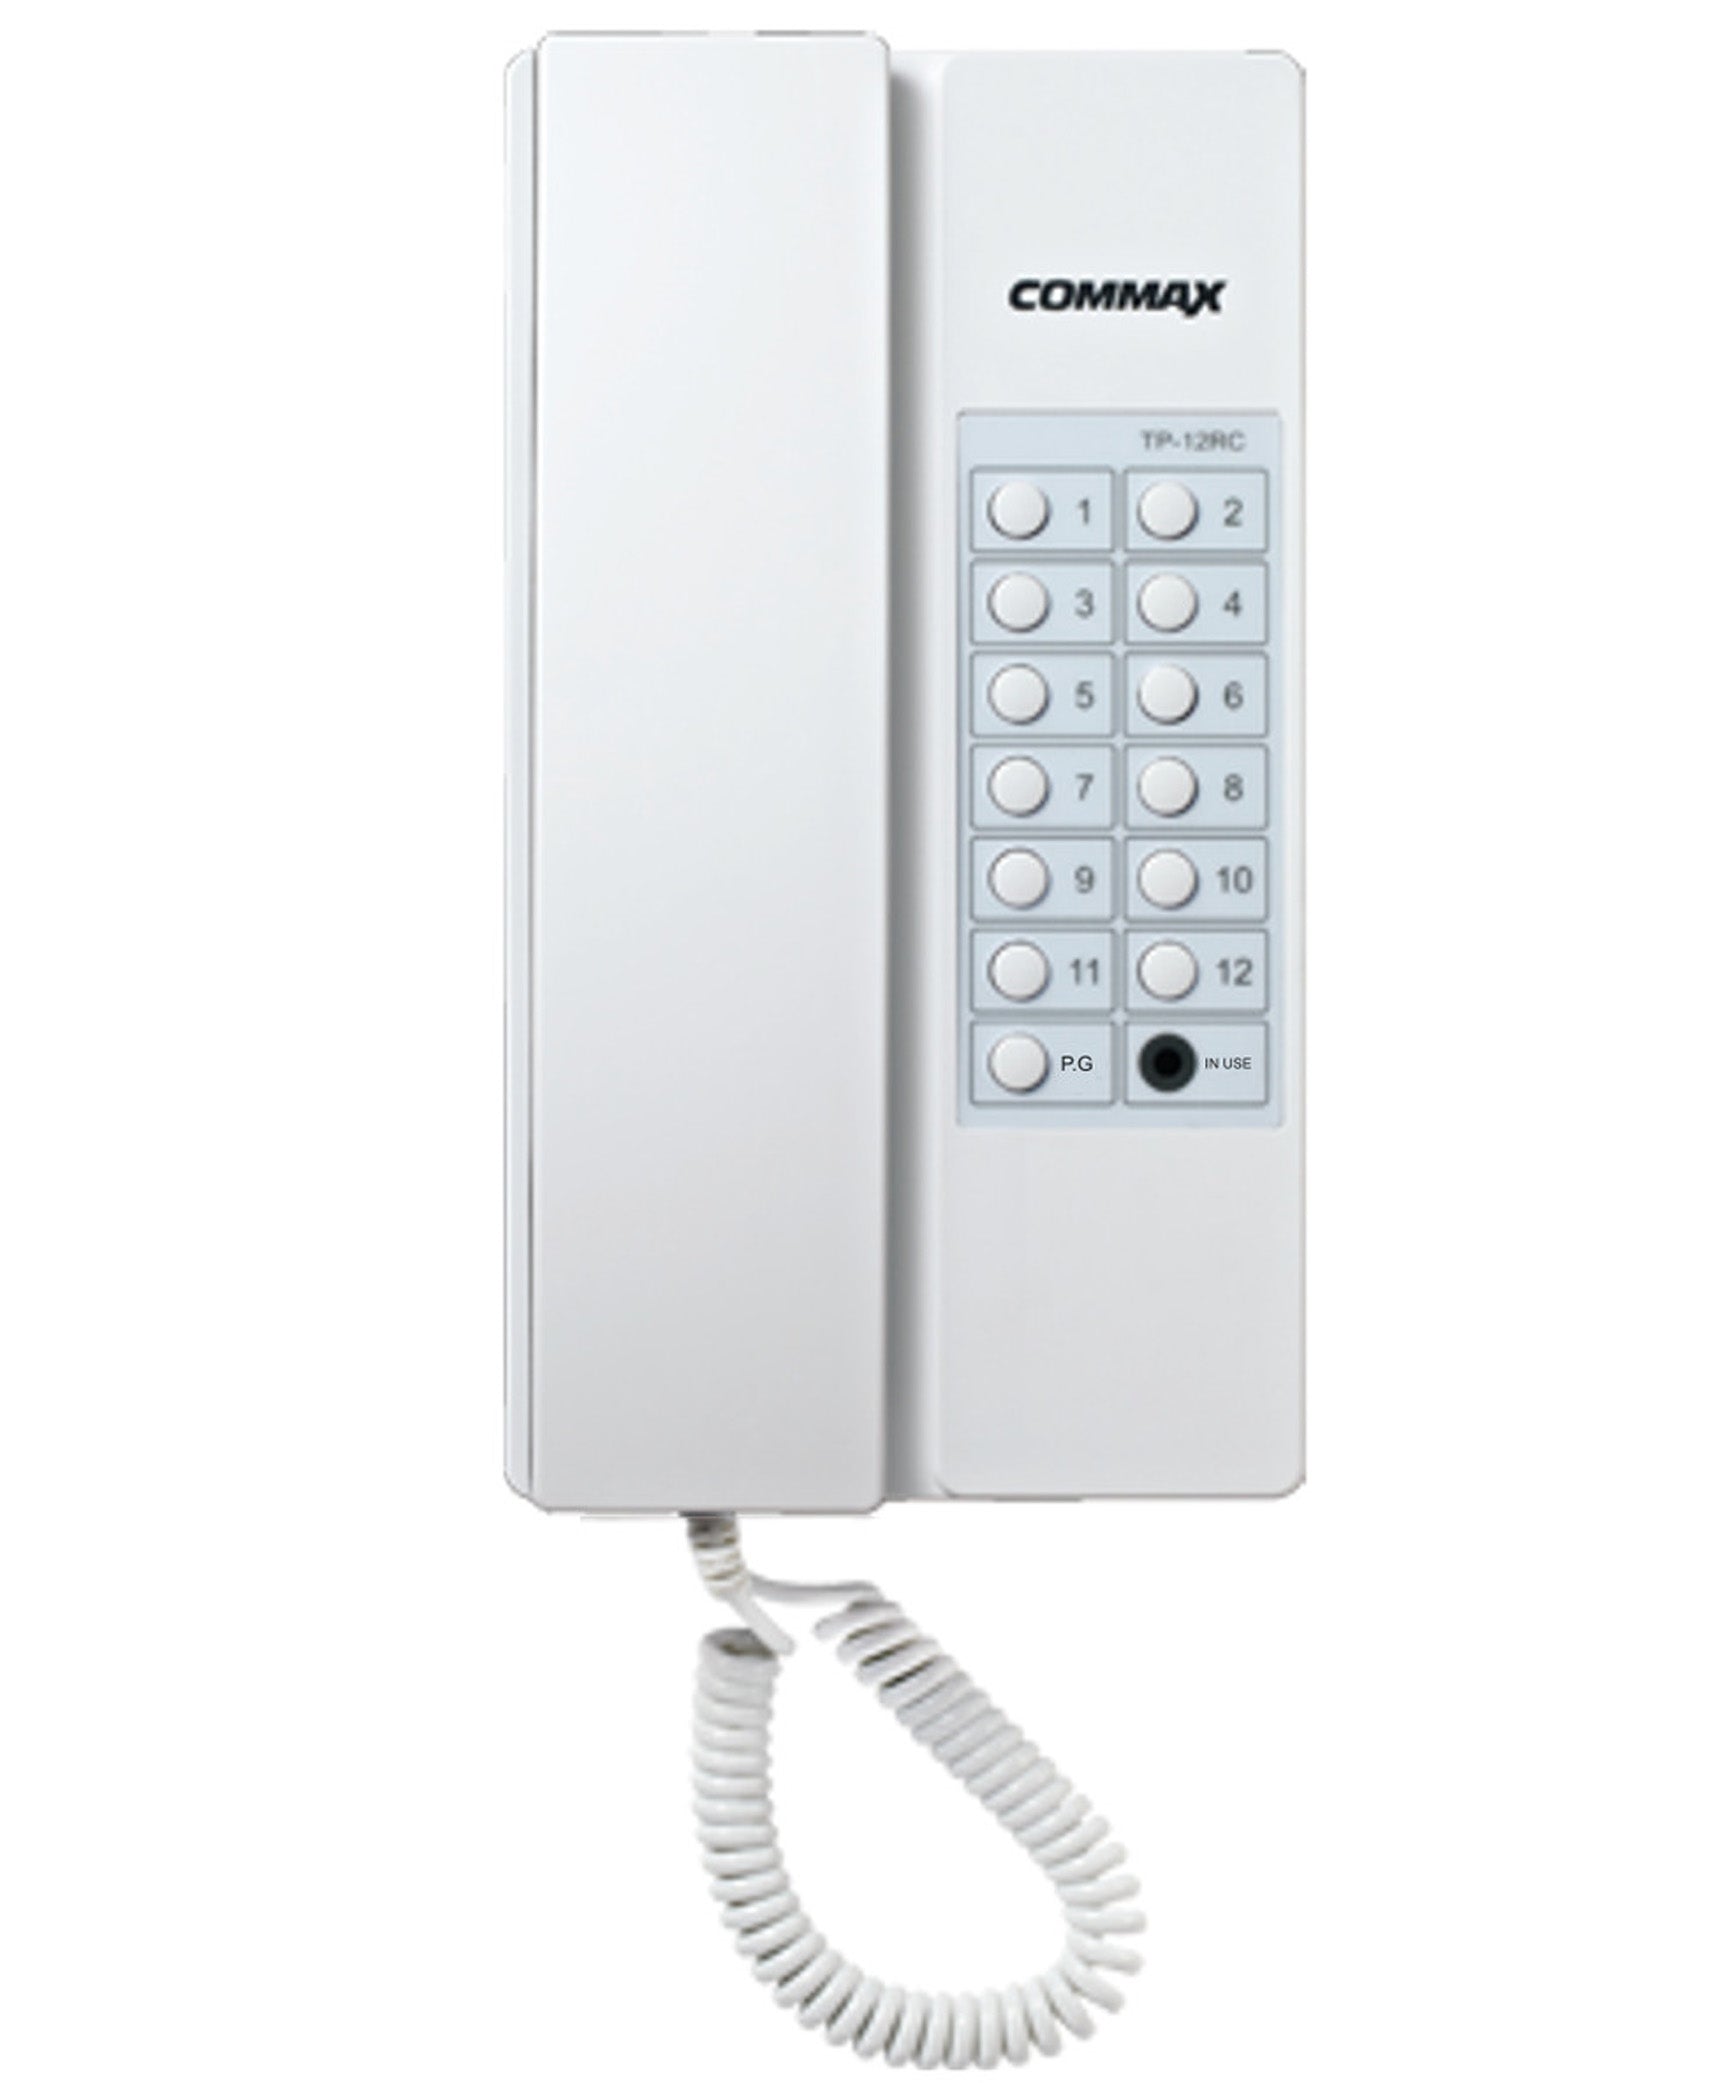 Commax 12 Button Audio Interphone Connectable with 12 Audio Stations, White, TP-12RC